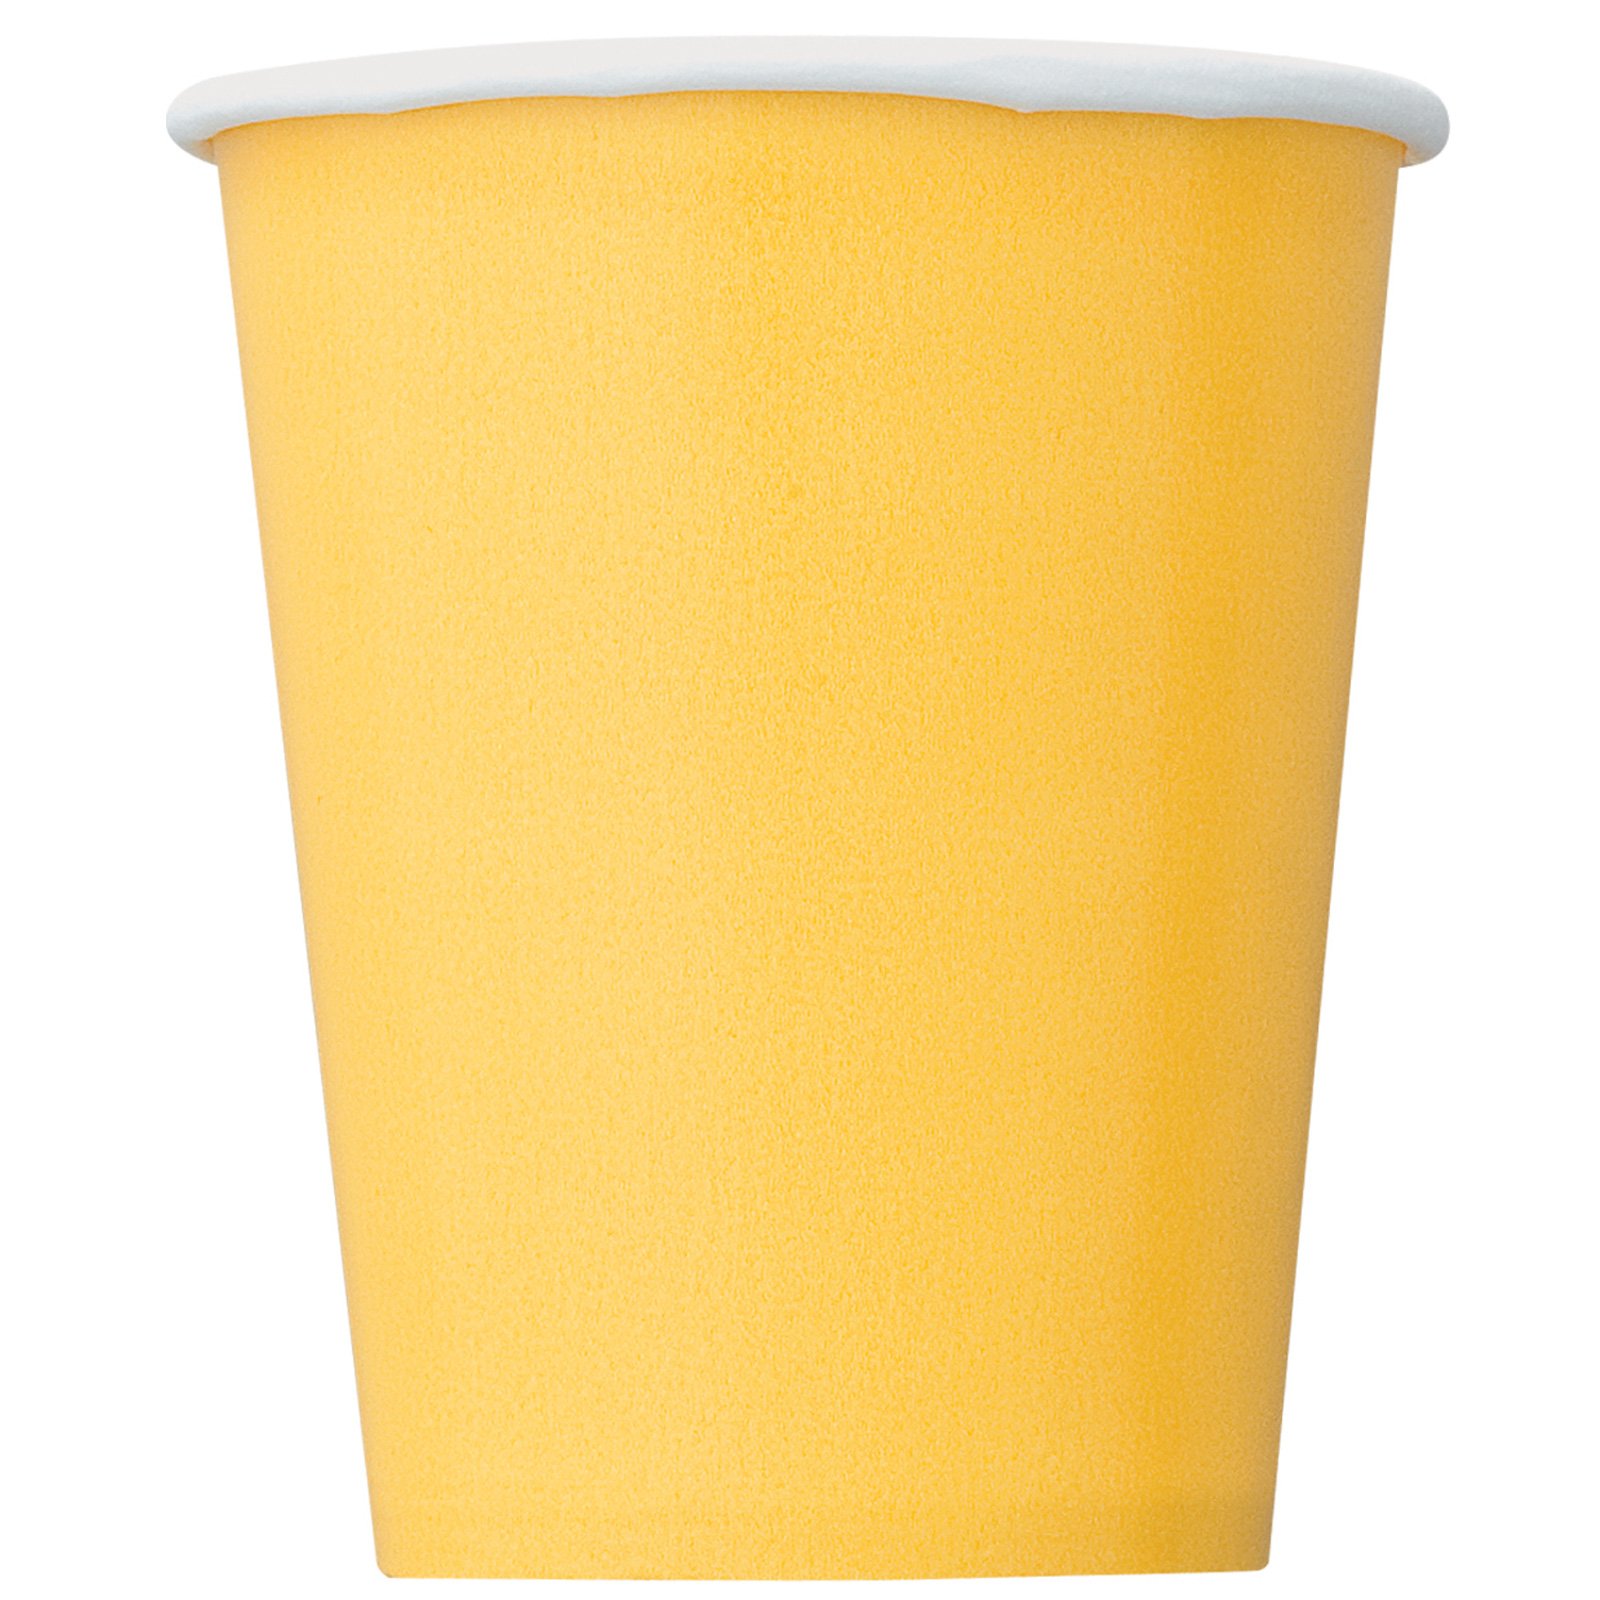 Sunflower Yellow 9 oz. Cups (8 count)